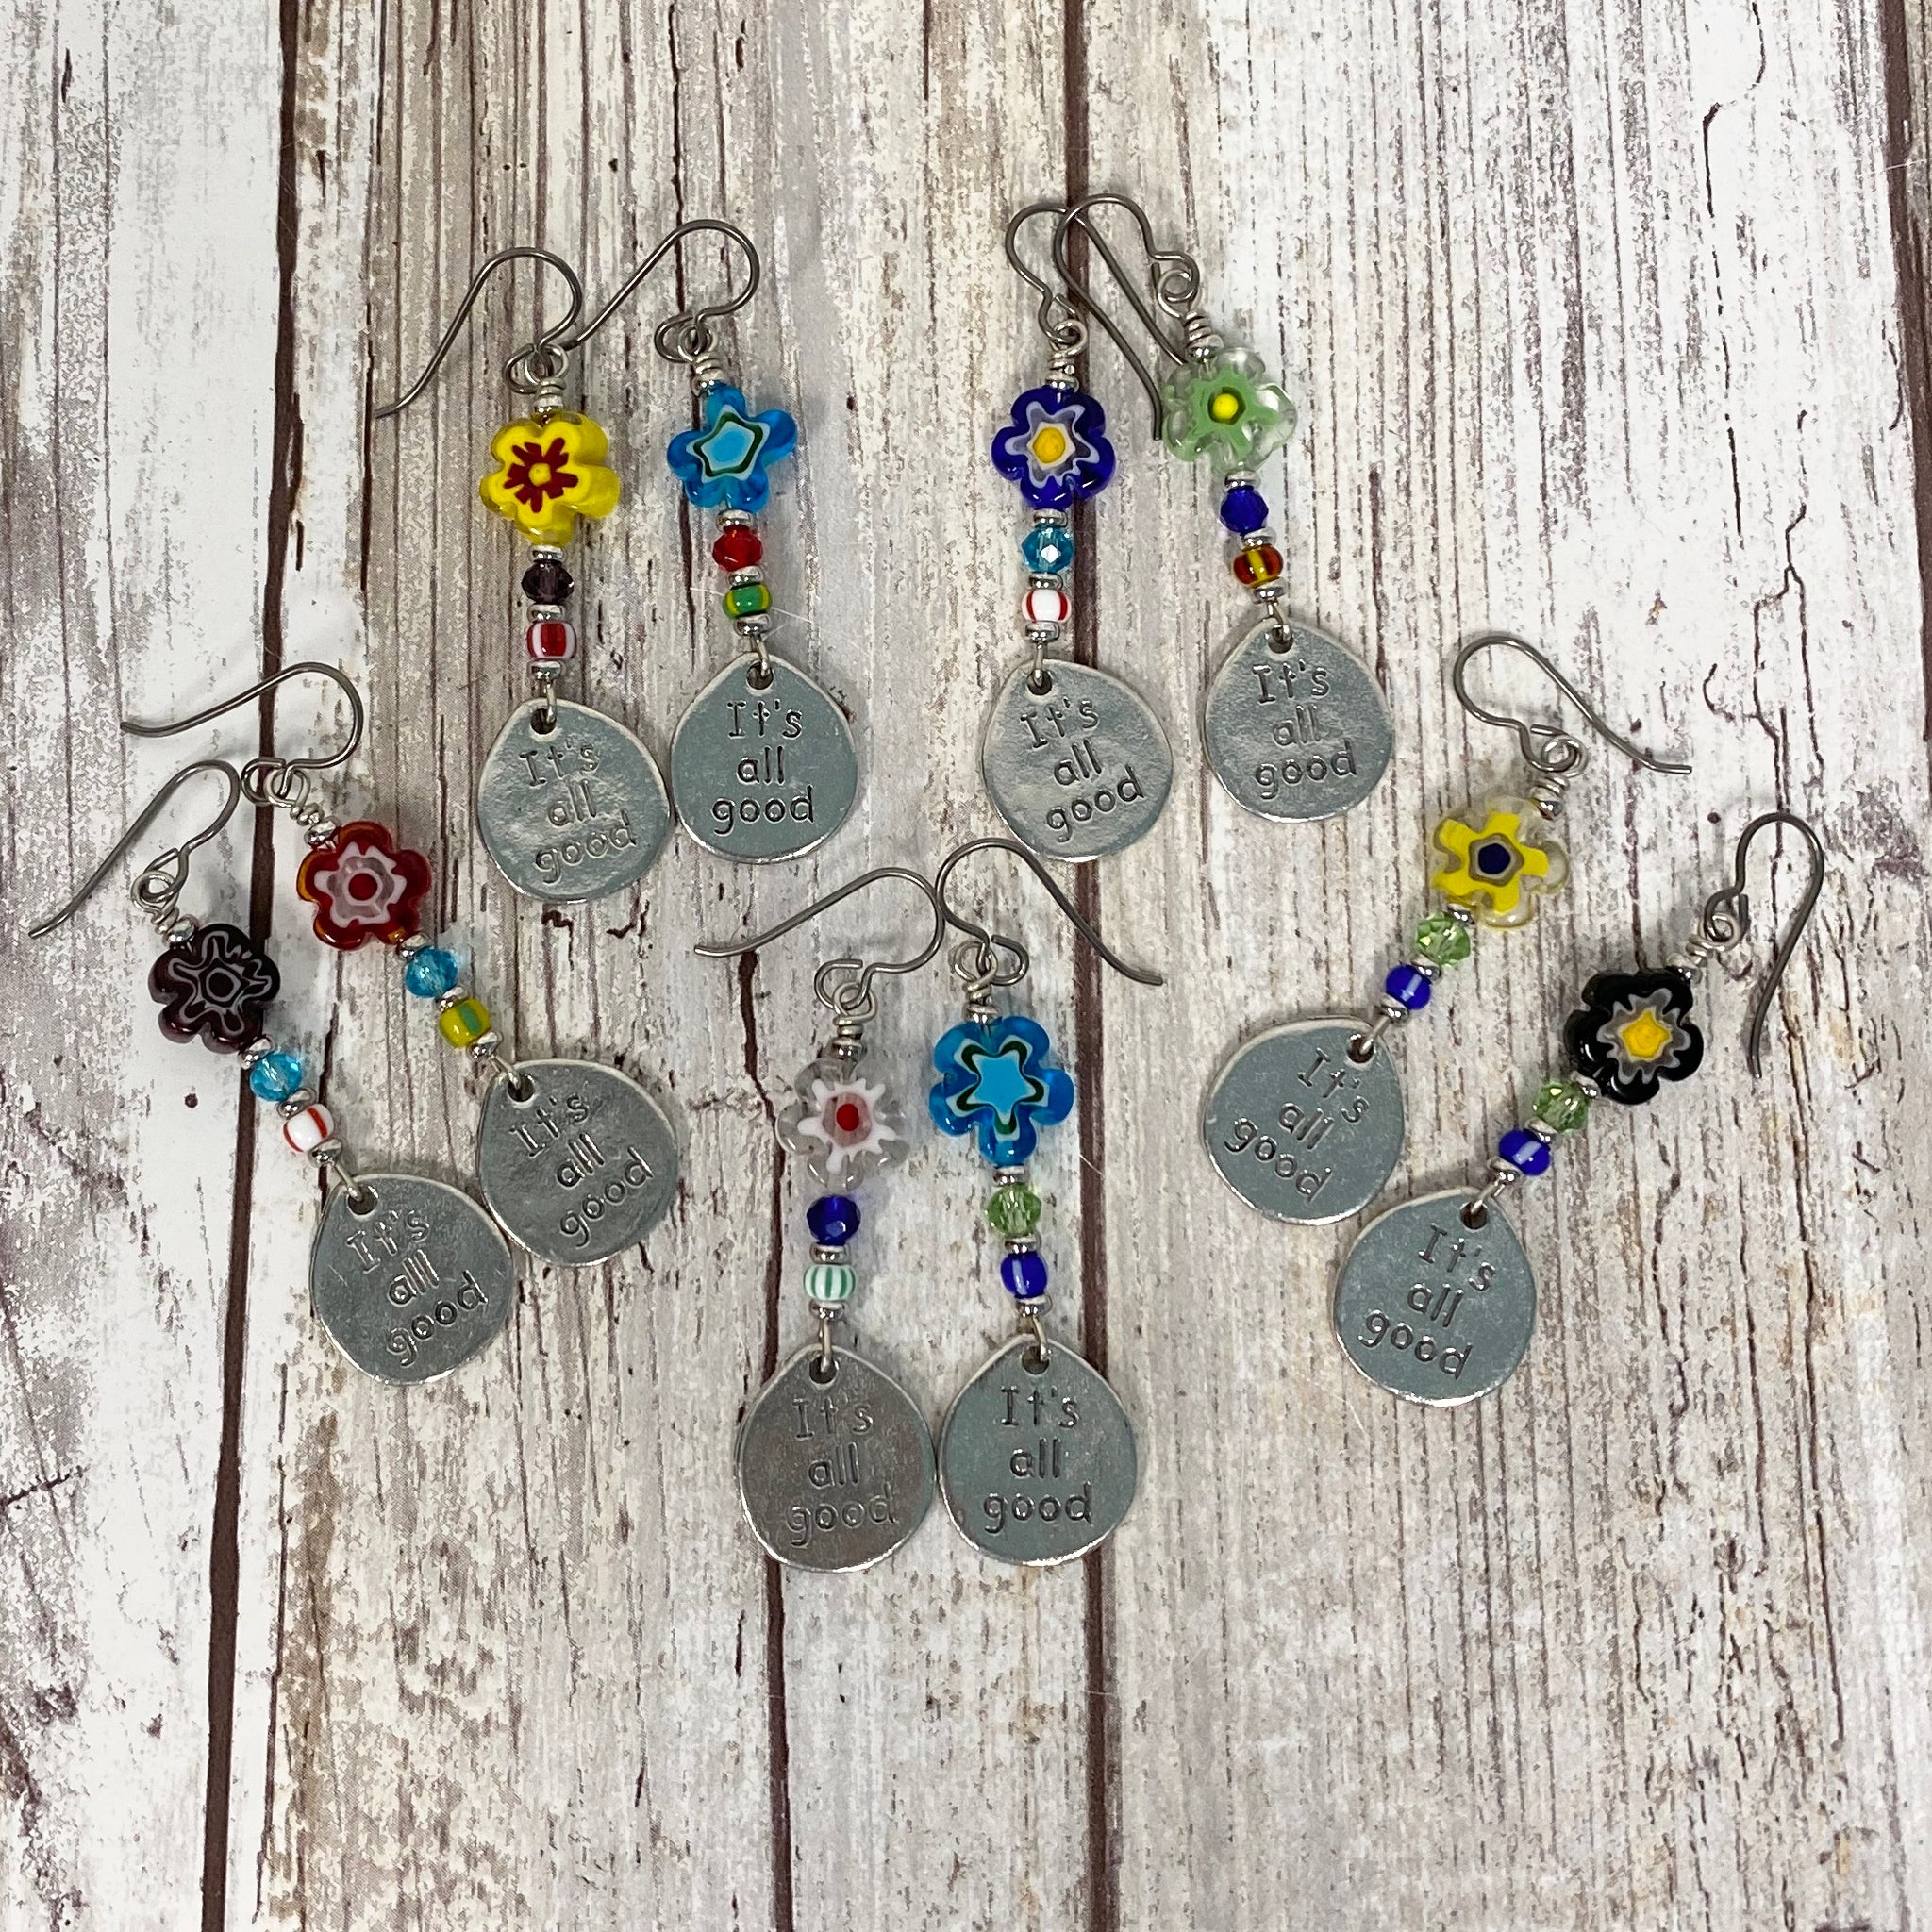 It's All Good Earrings - Happy Colorful Flowers